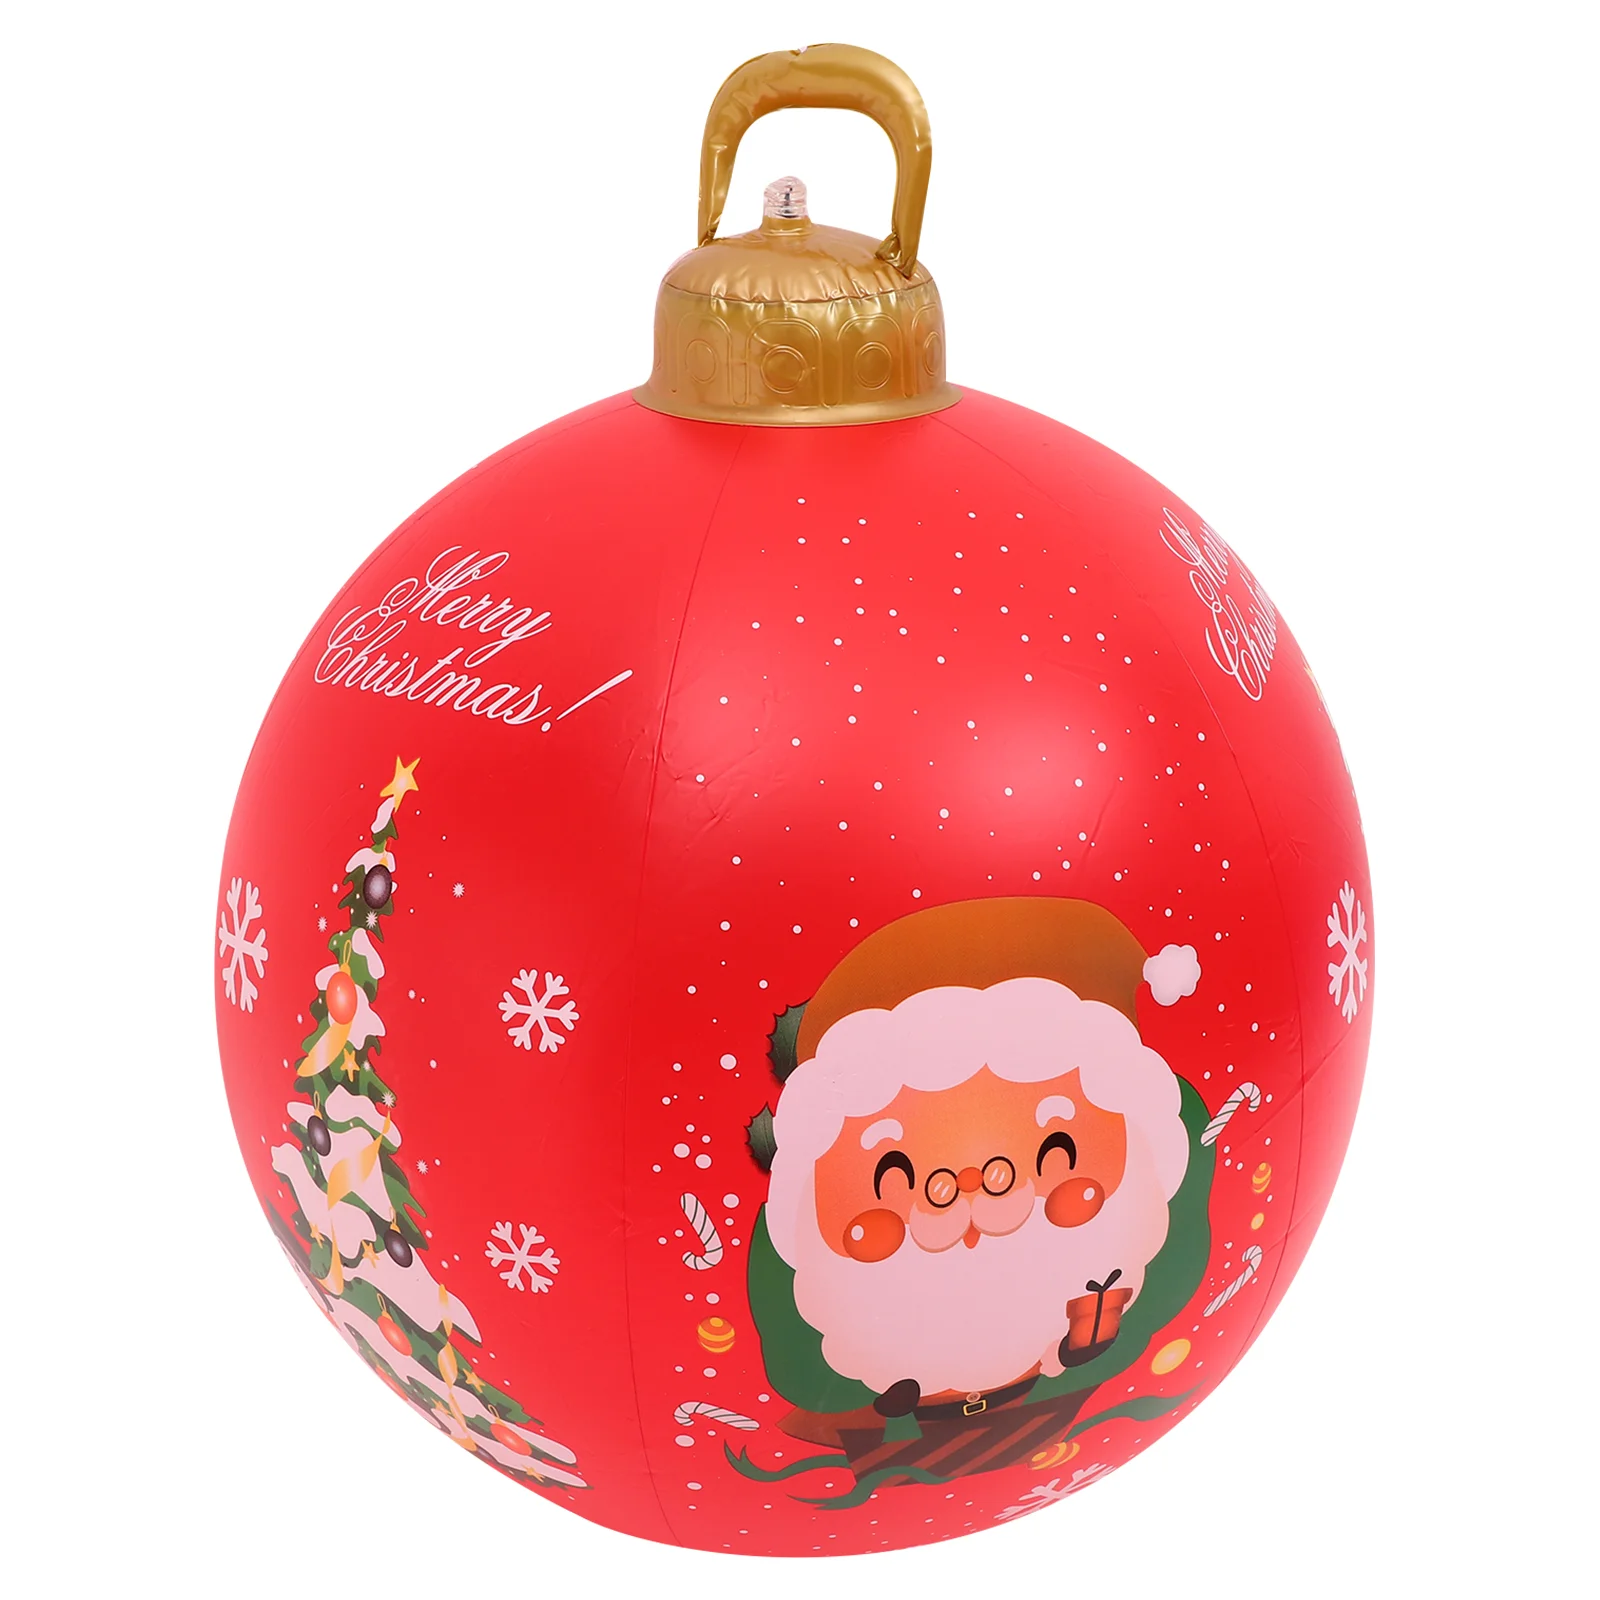 

Christmas Large Inflatable Decoration over Size Ball Inflatables outside Toys Decorations Ornaments Outdoor Blow up Yard Xmas